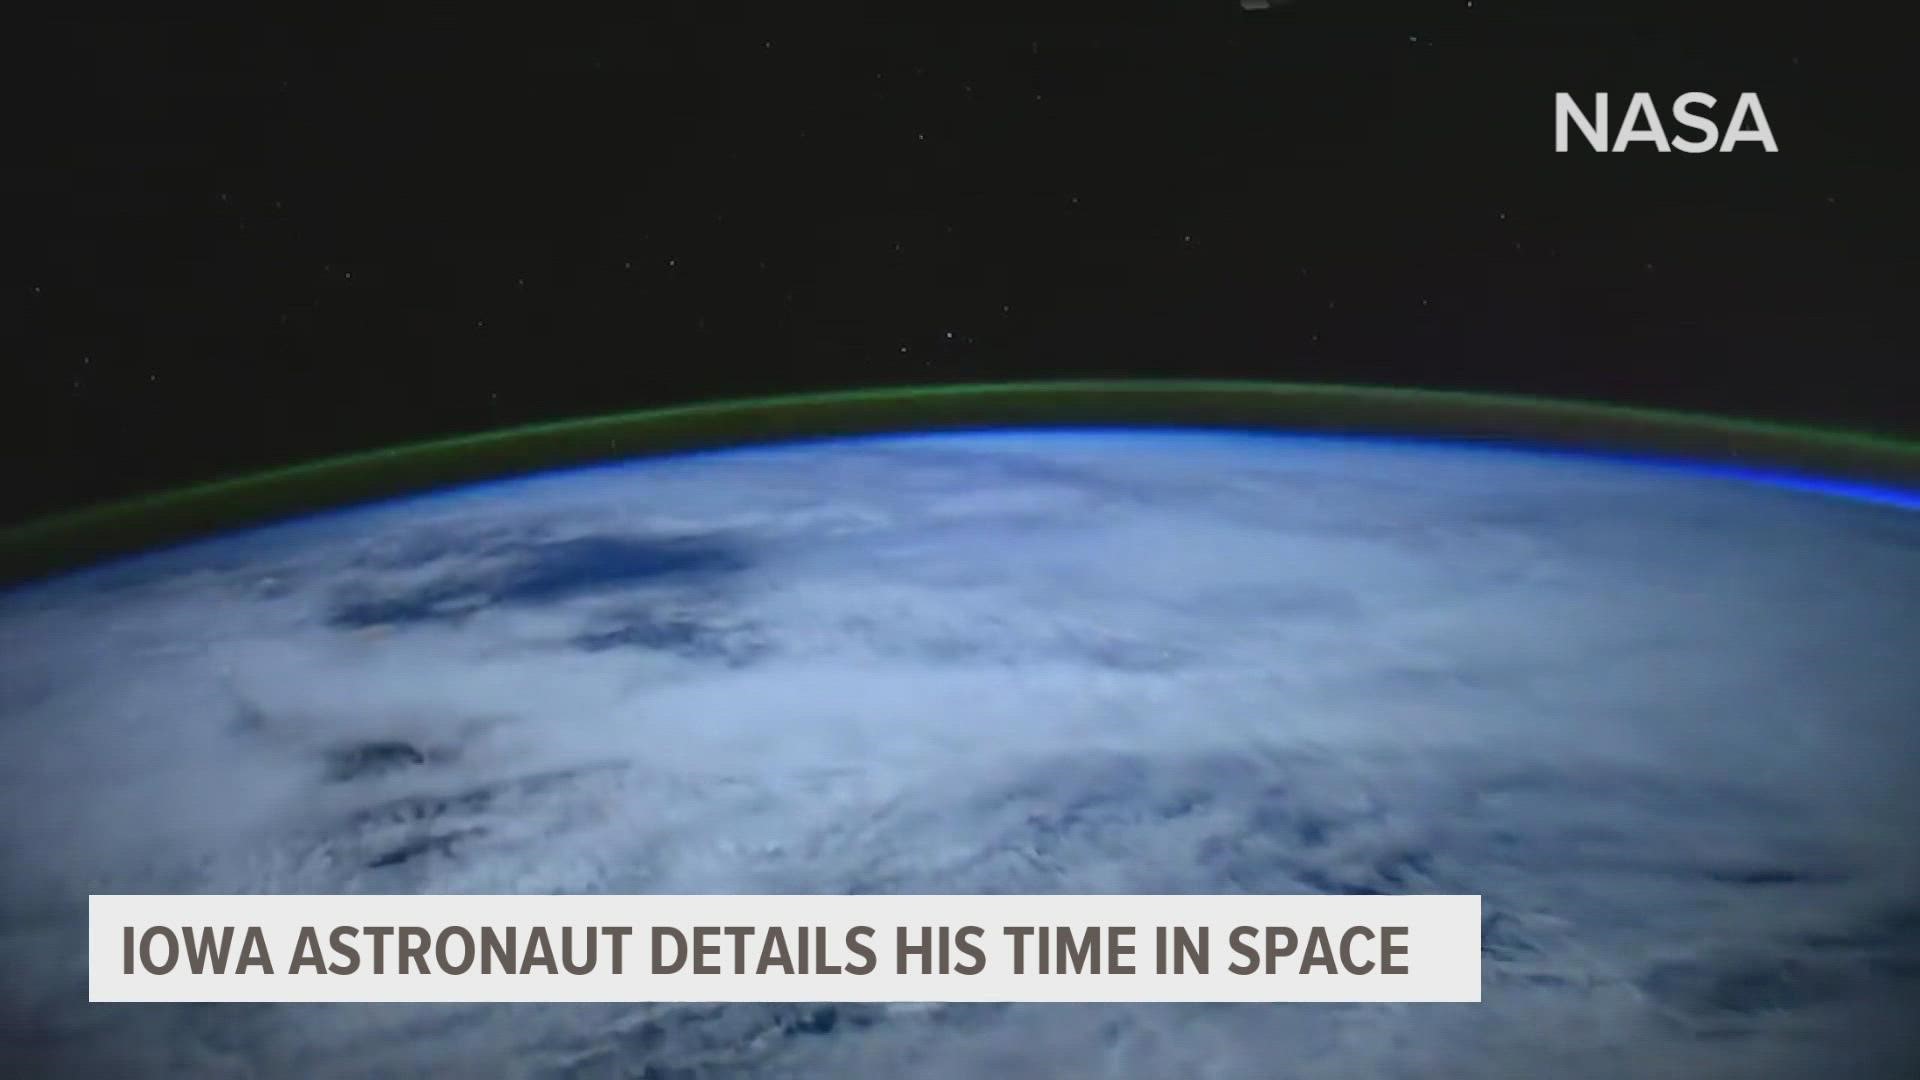 Iowa Astronaut explains what his time was like in space, and why he was there.